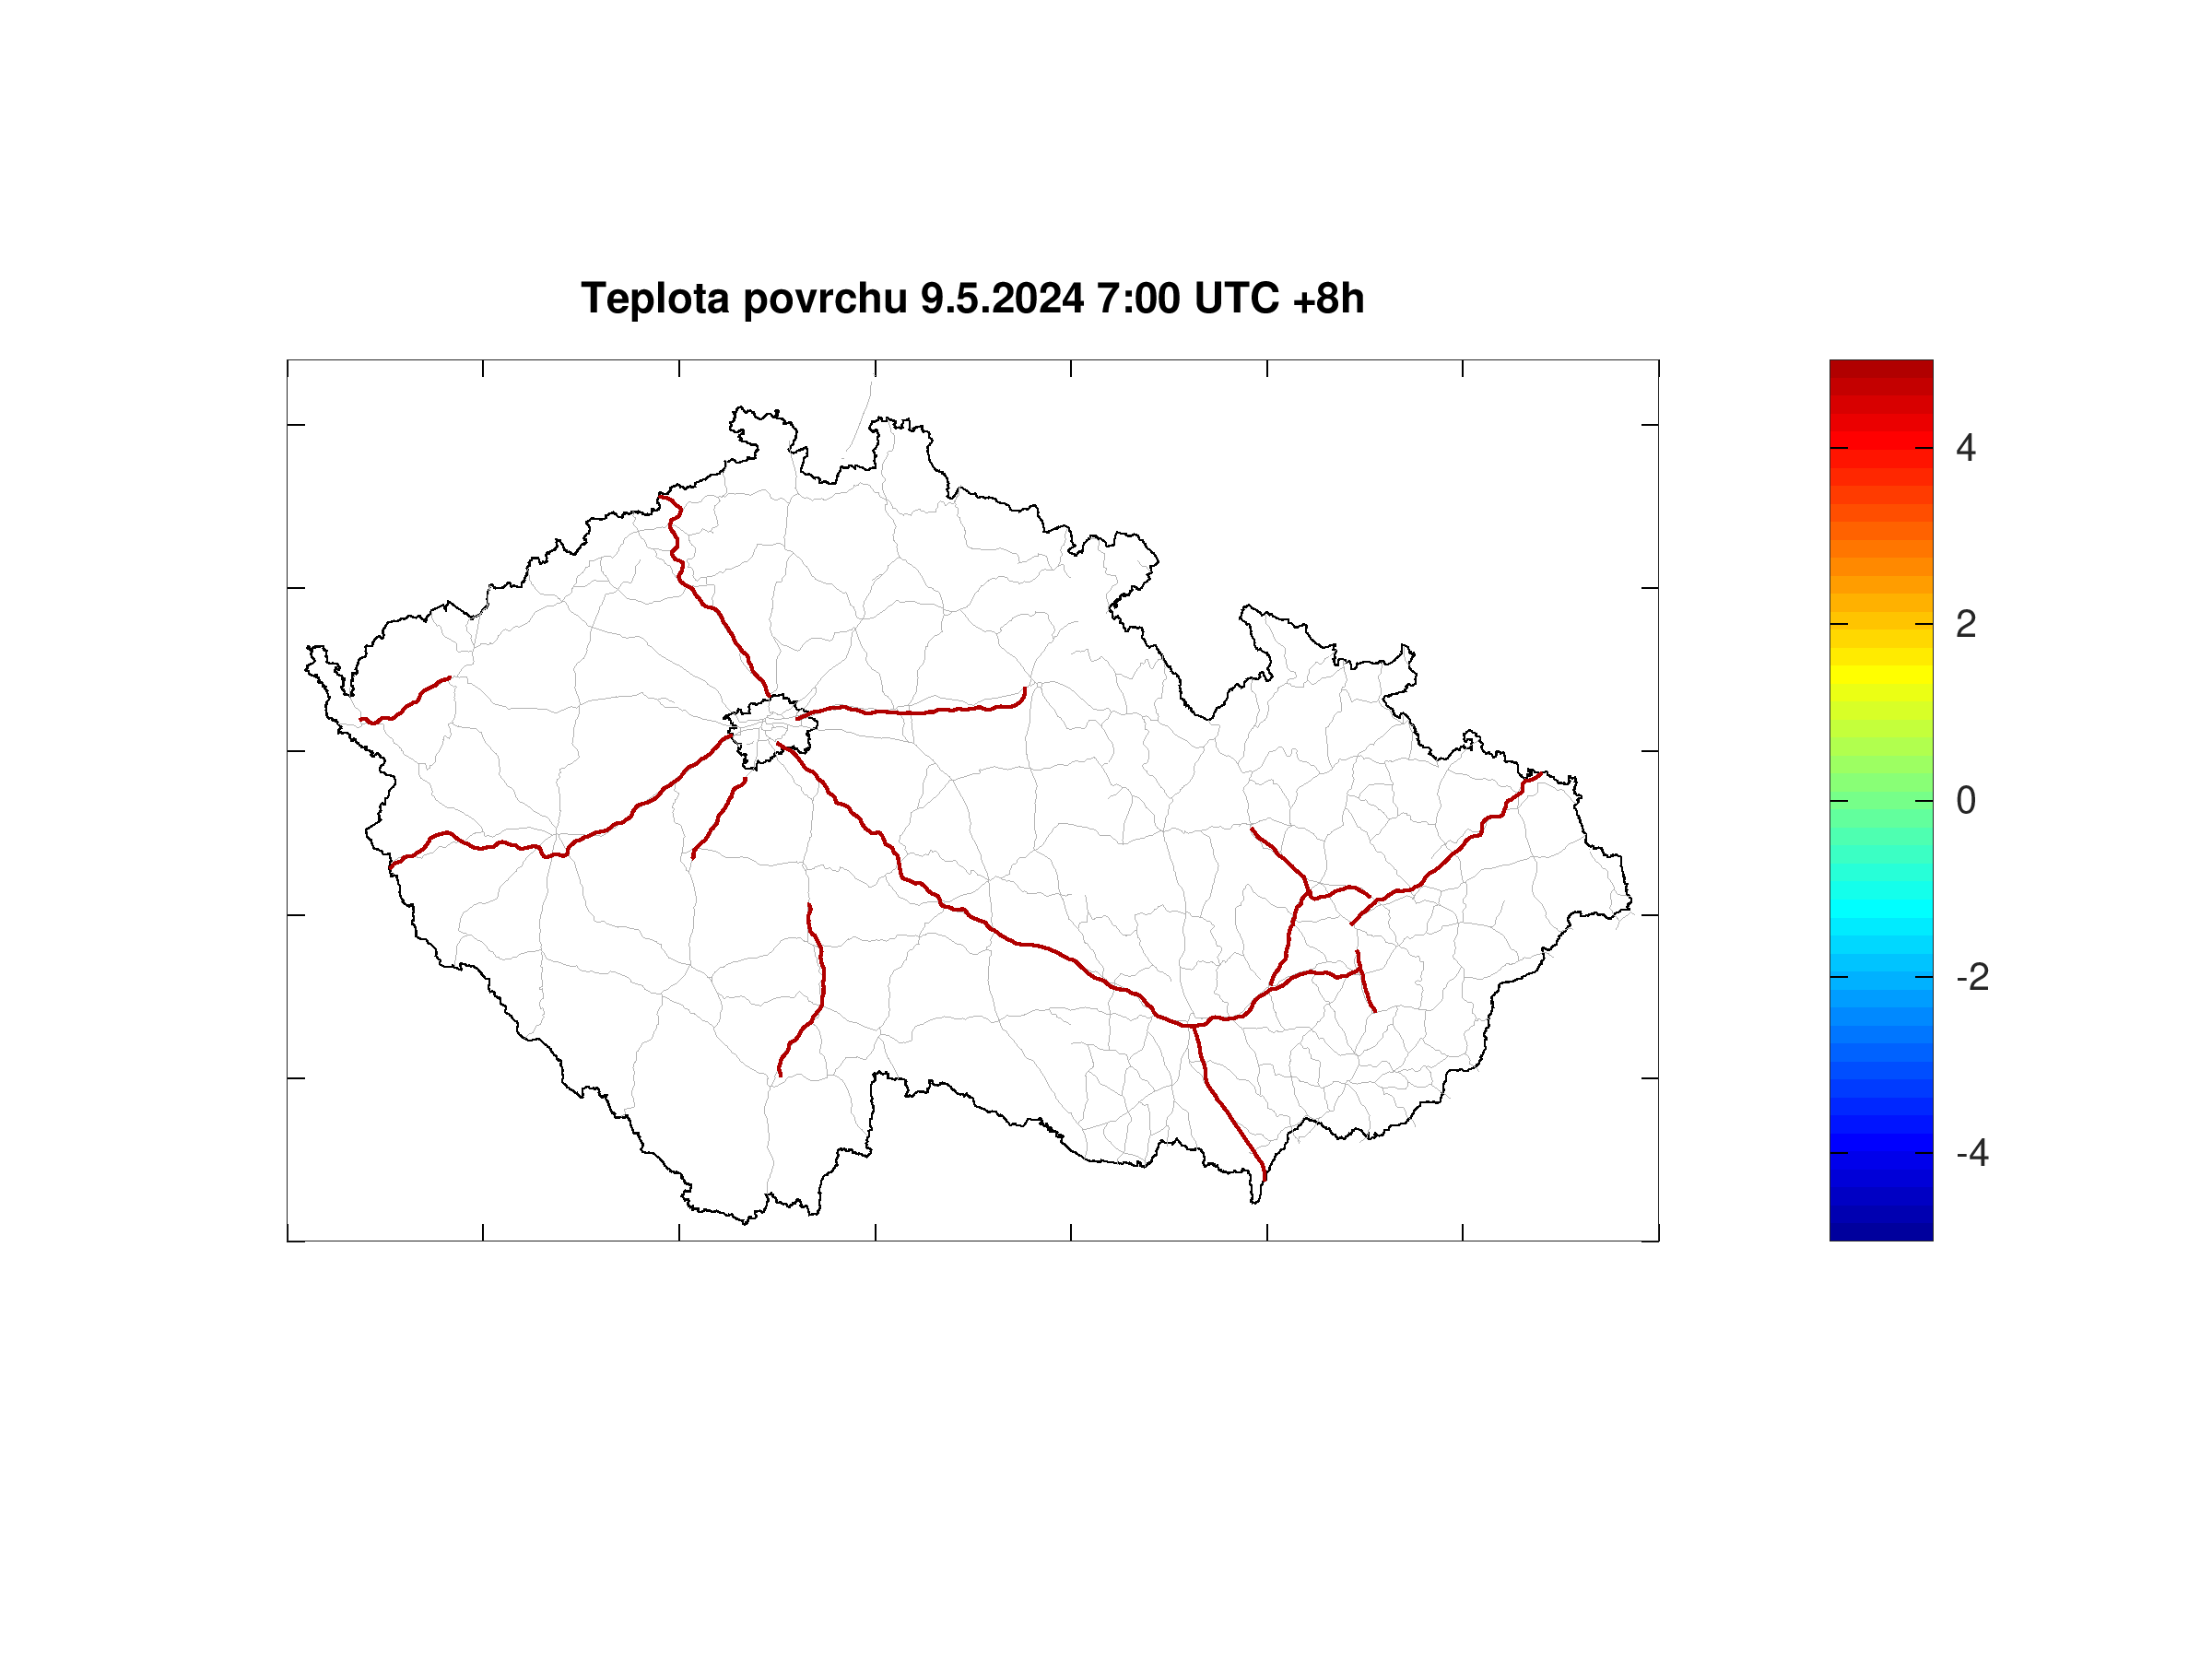 Road surface teperature forecast for Czech highways +8h